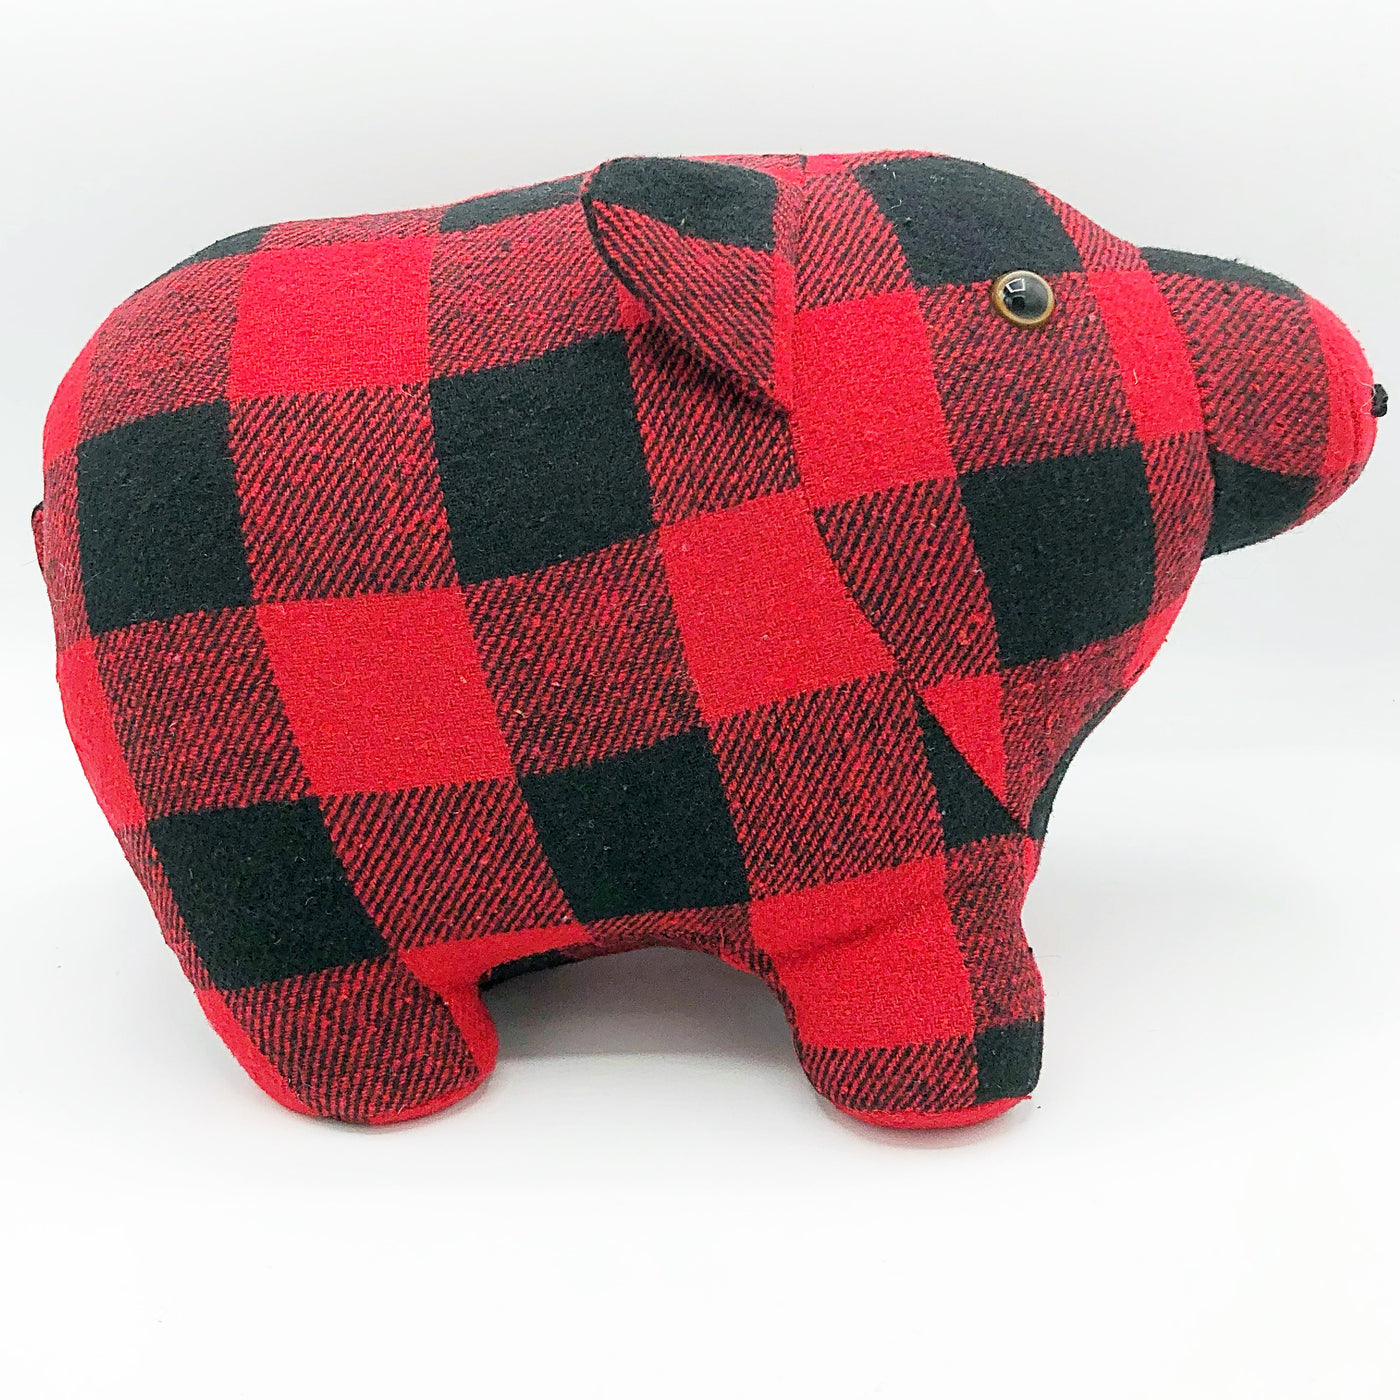 Buffalo Plaid Black and Red Pig Door Stopper